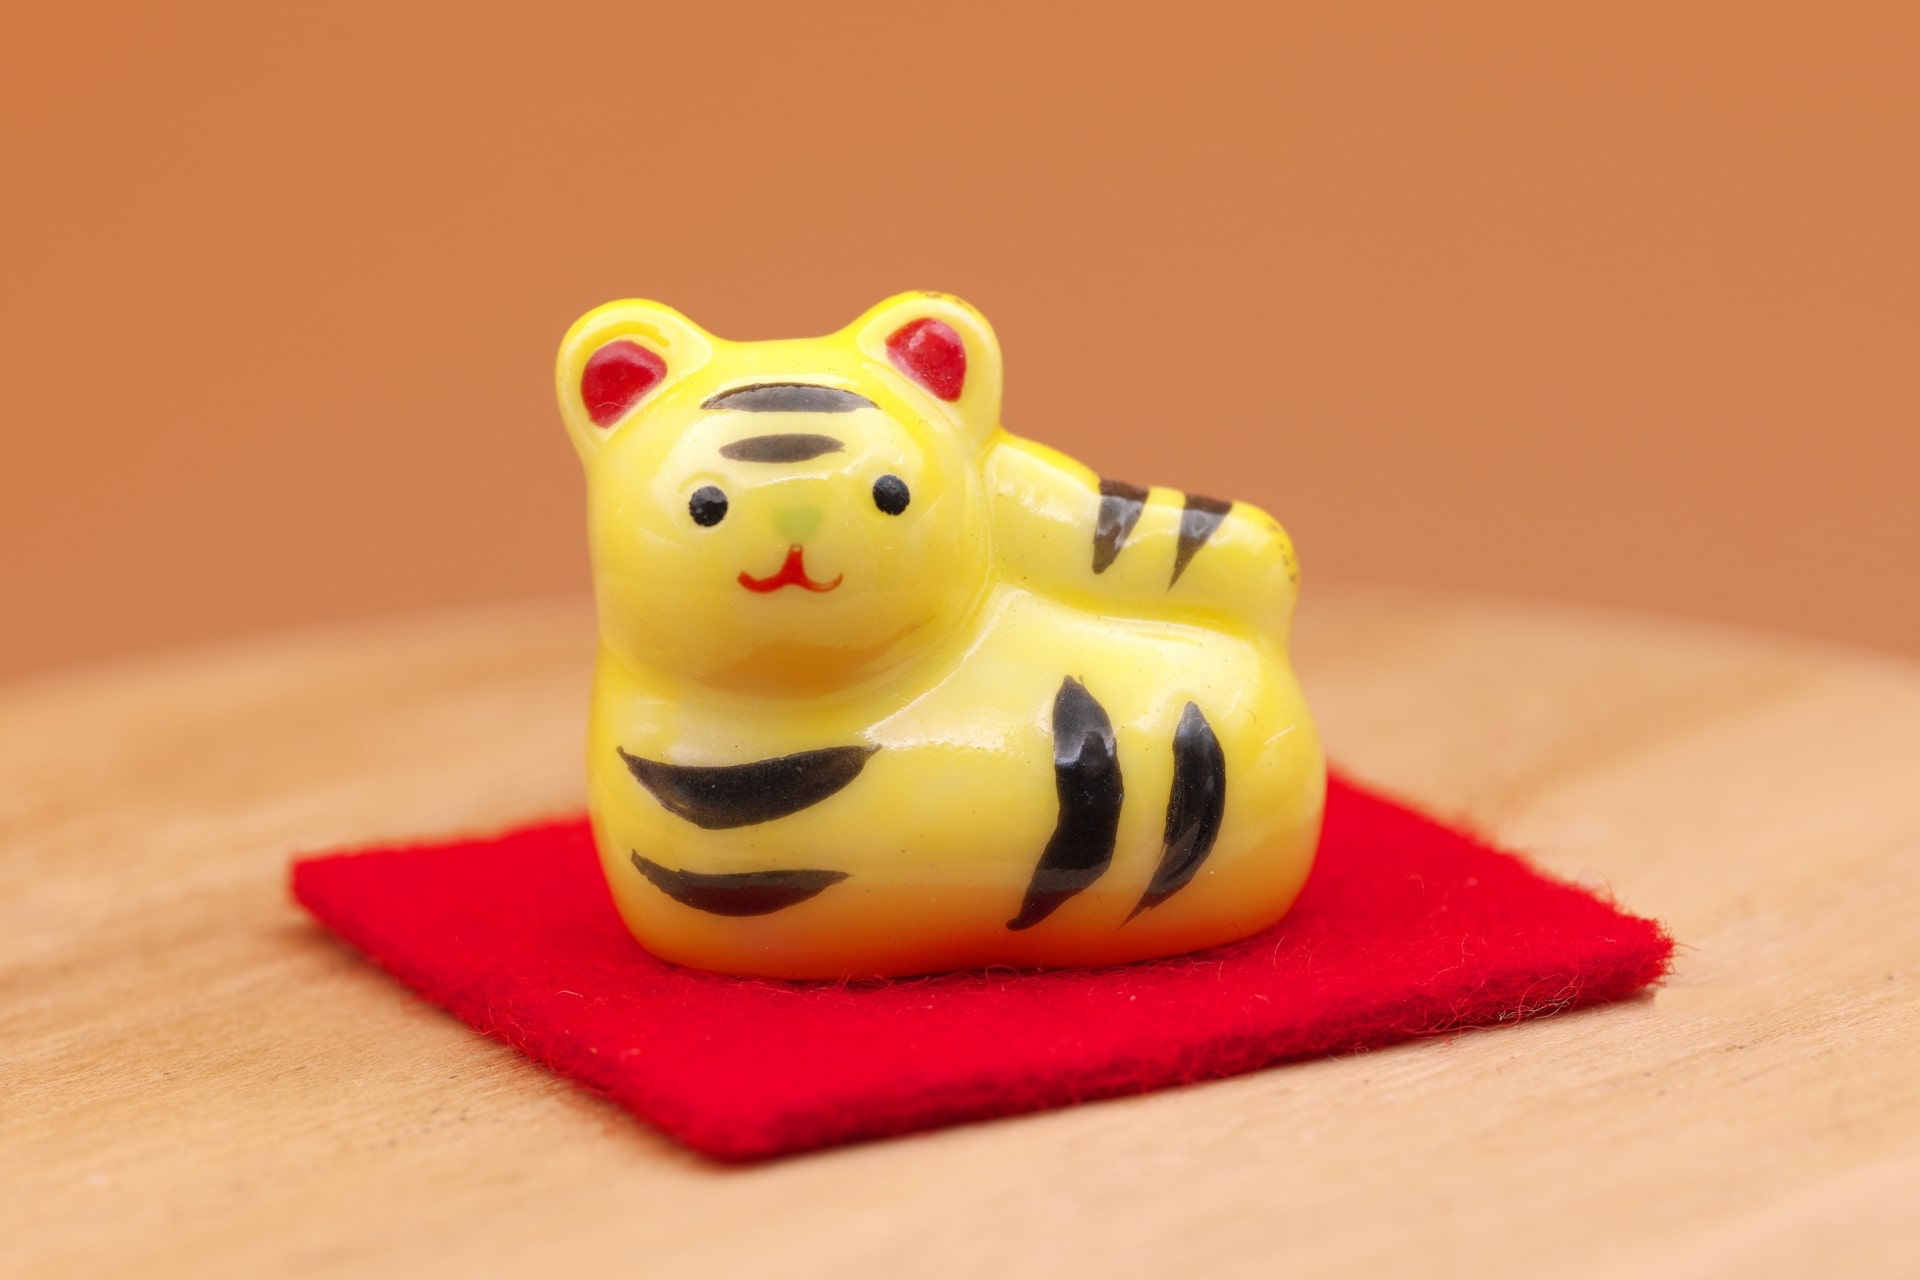 Small figurine depicting the tiger from Chinese Zodiac